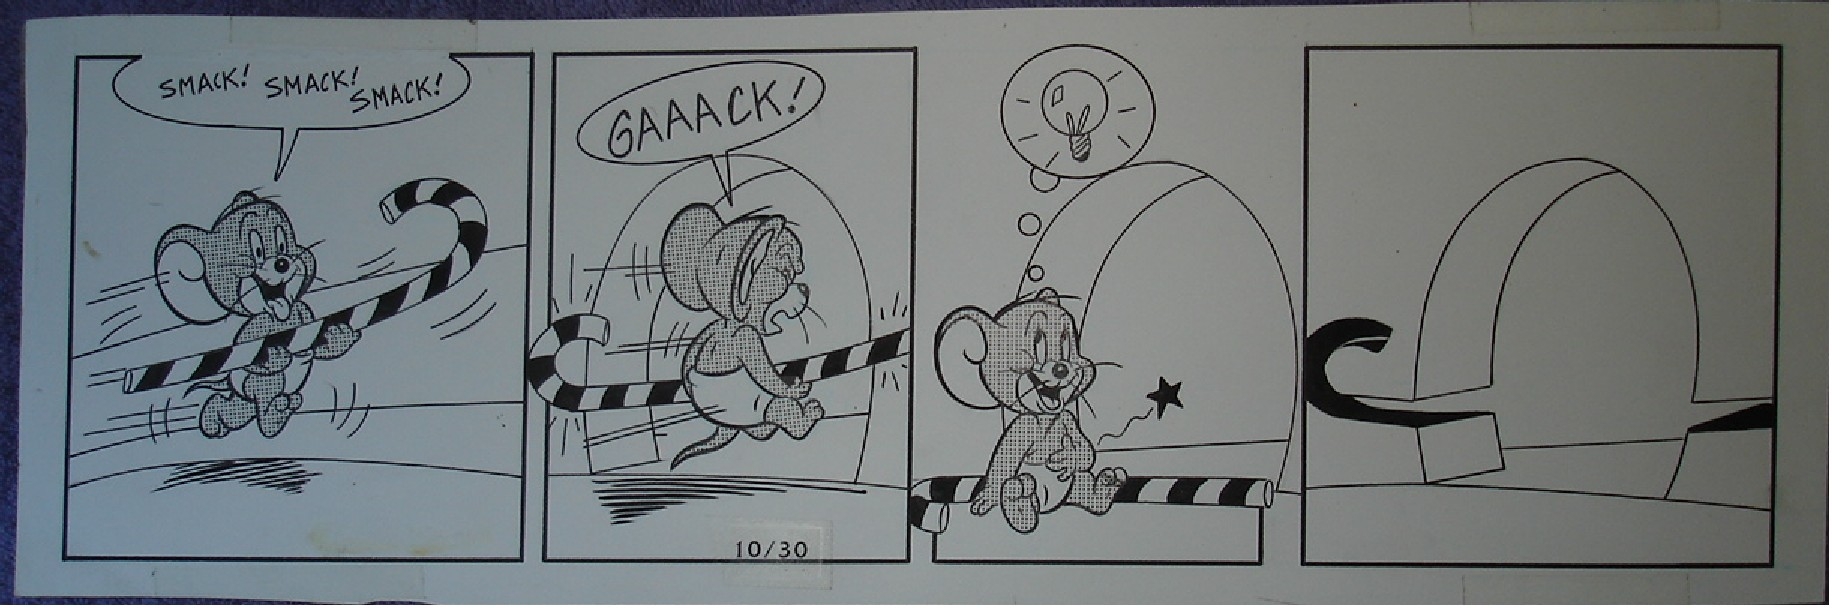 Tom & Jerry 10-30-????, in Edward Chauvin's Birthday Comic Strips Comic Art  Gallery Room